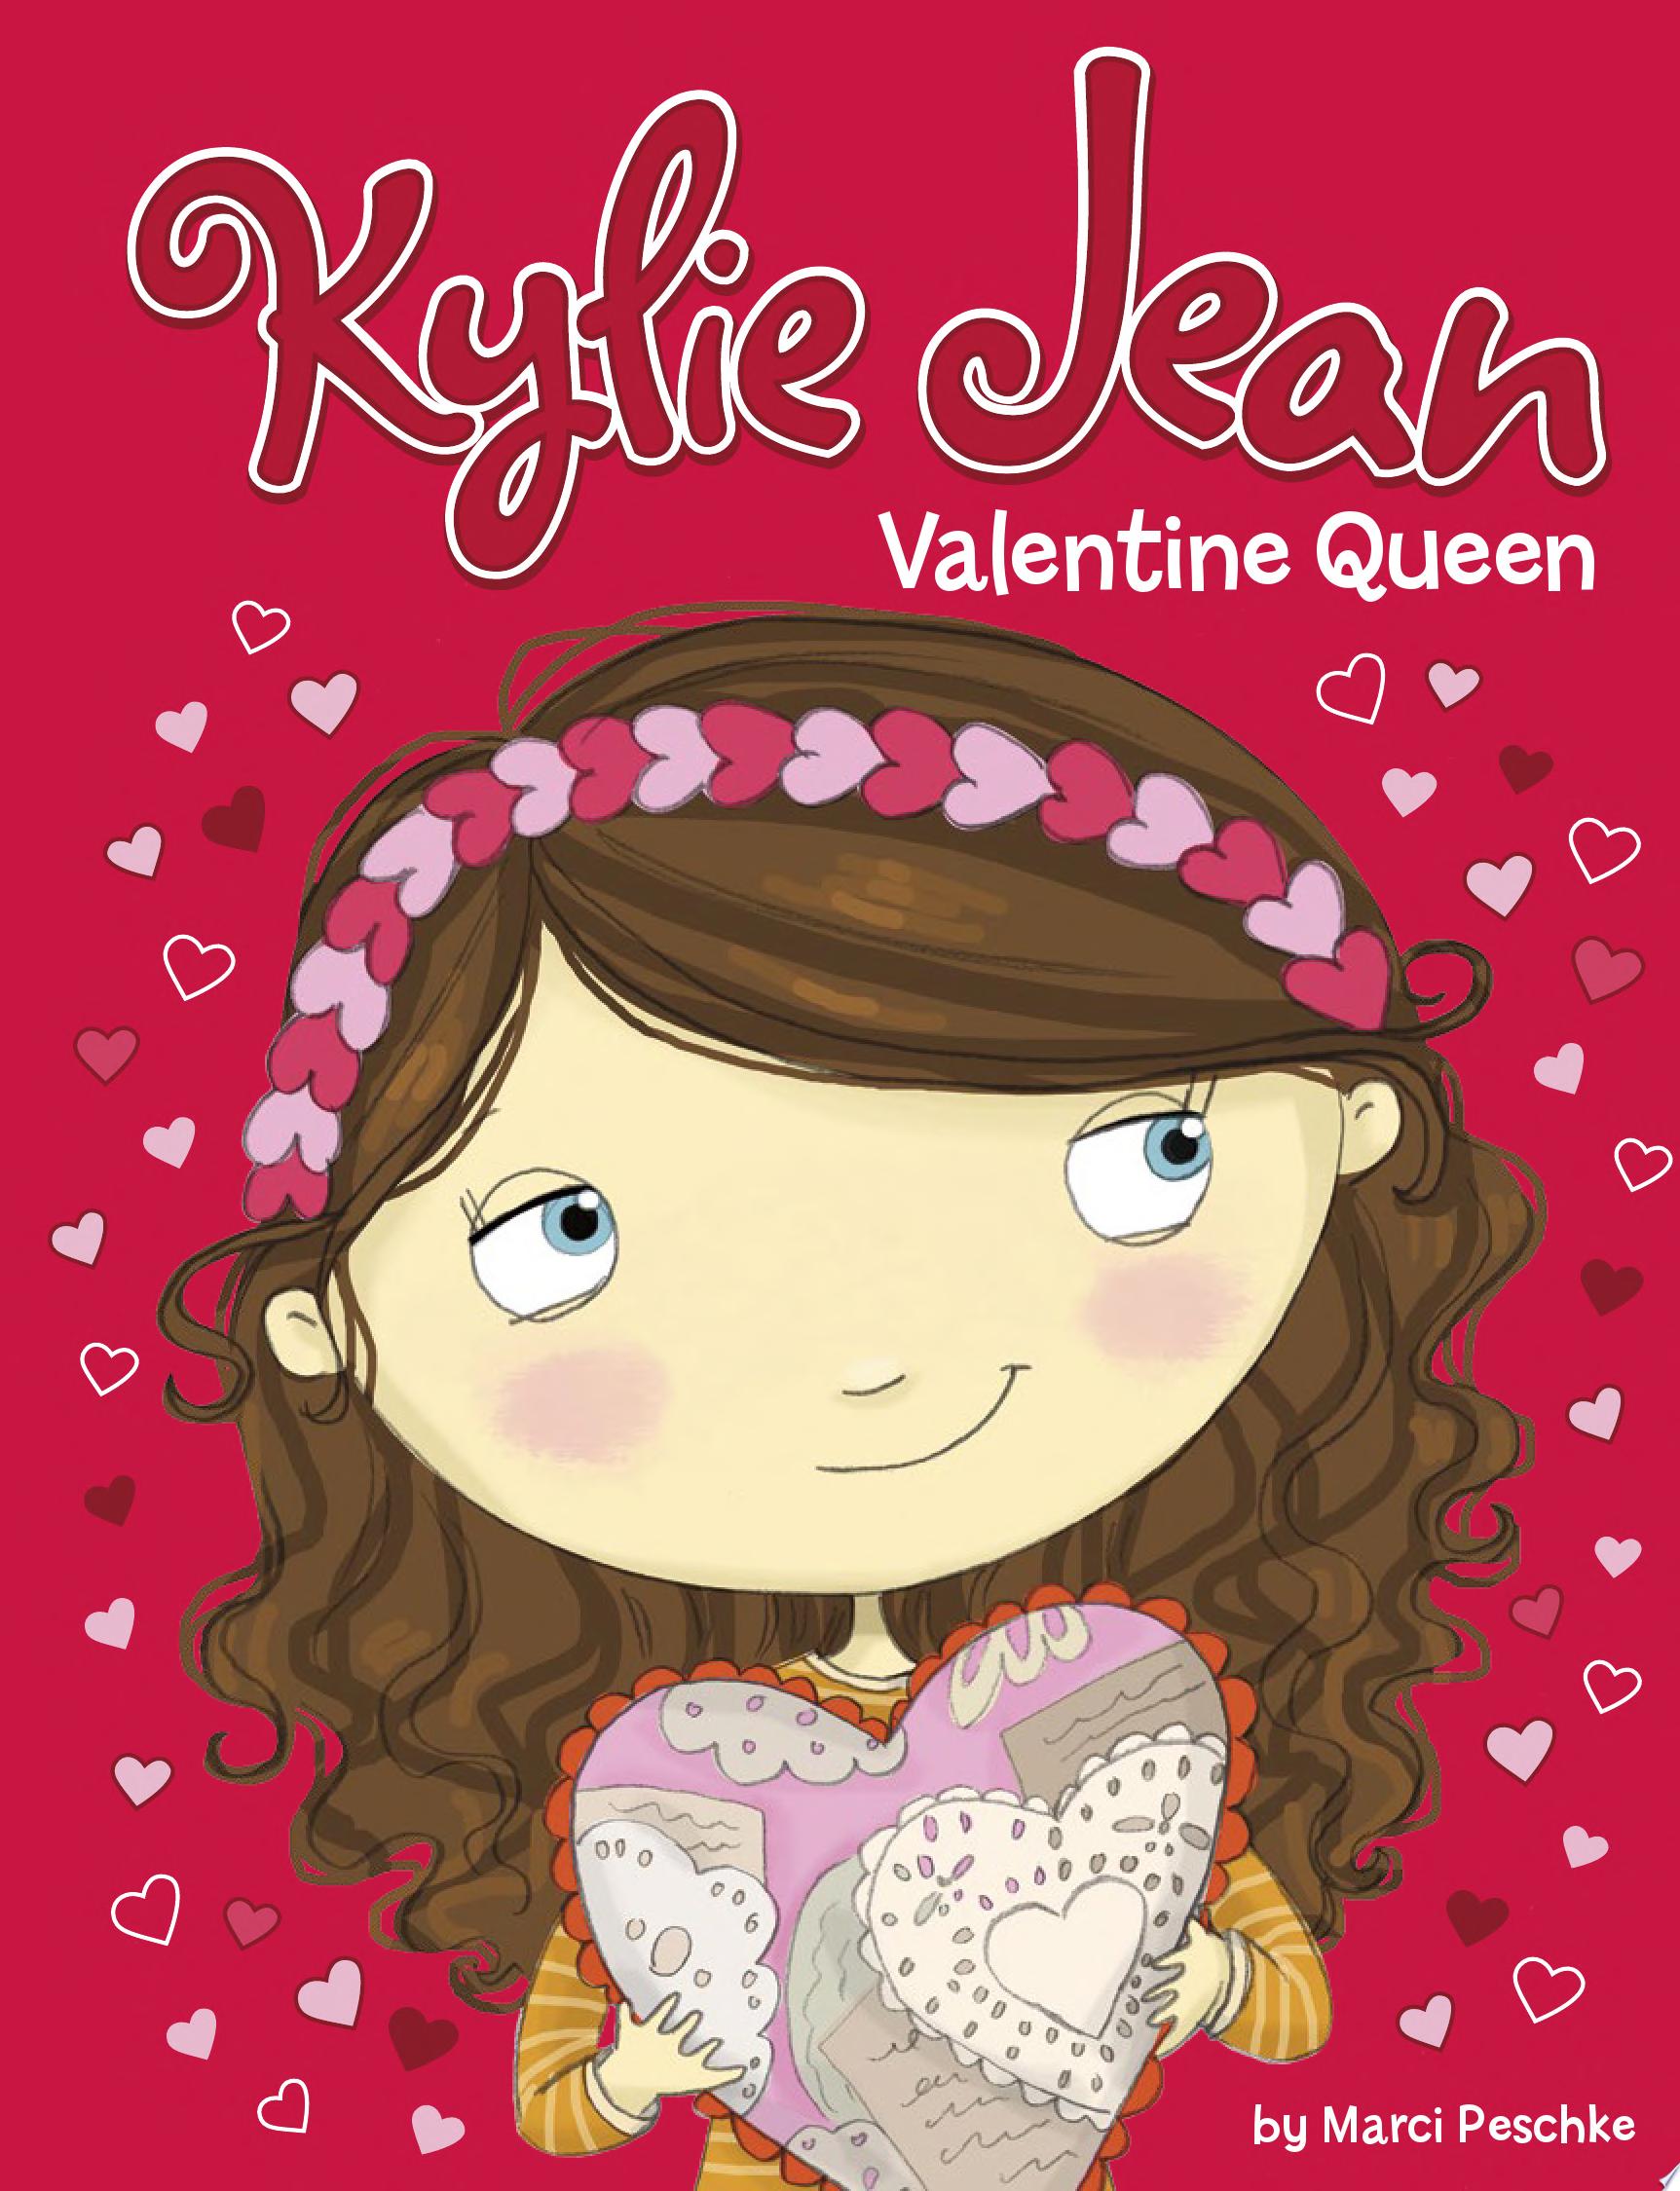 Image for "Valentine Queen"